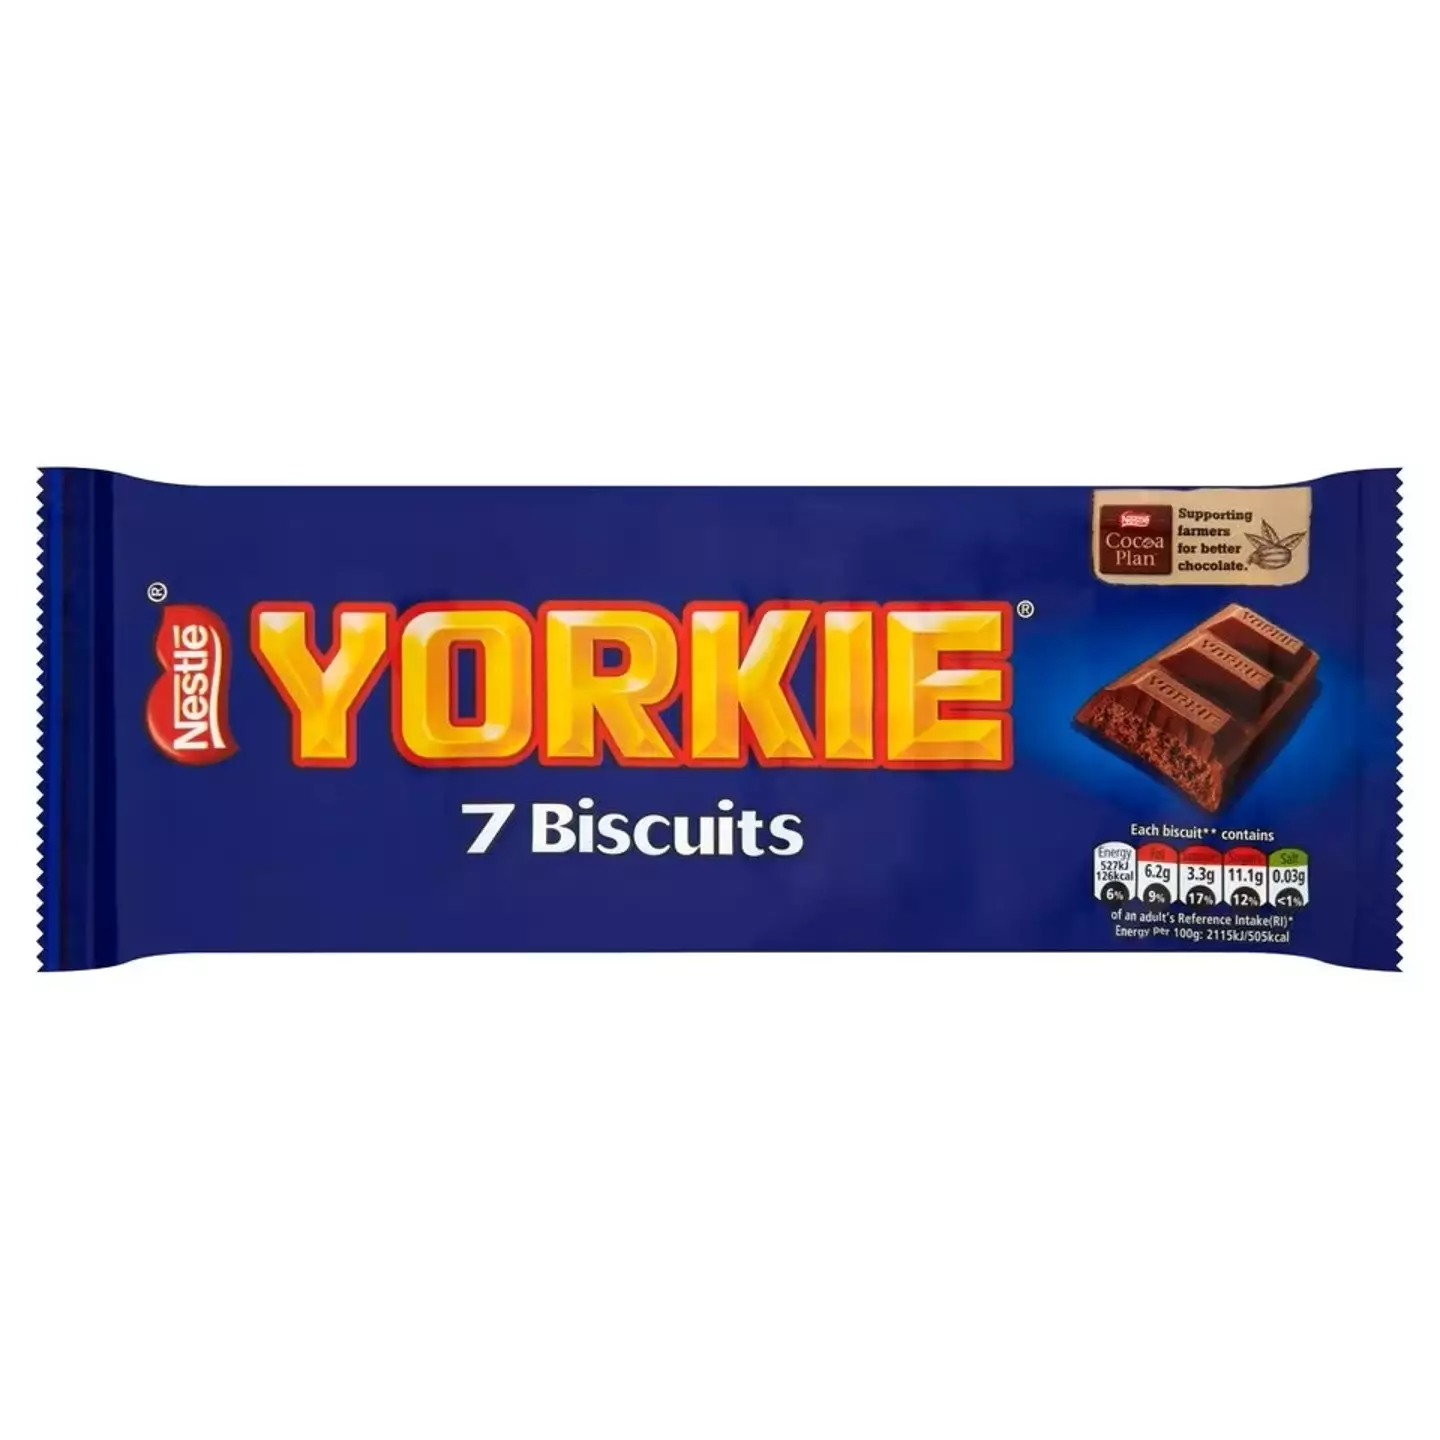 It’s time to say goodbye to Yorkie biscuit bars, too.